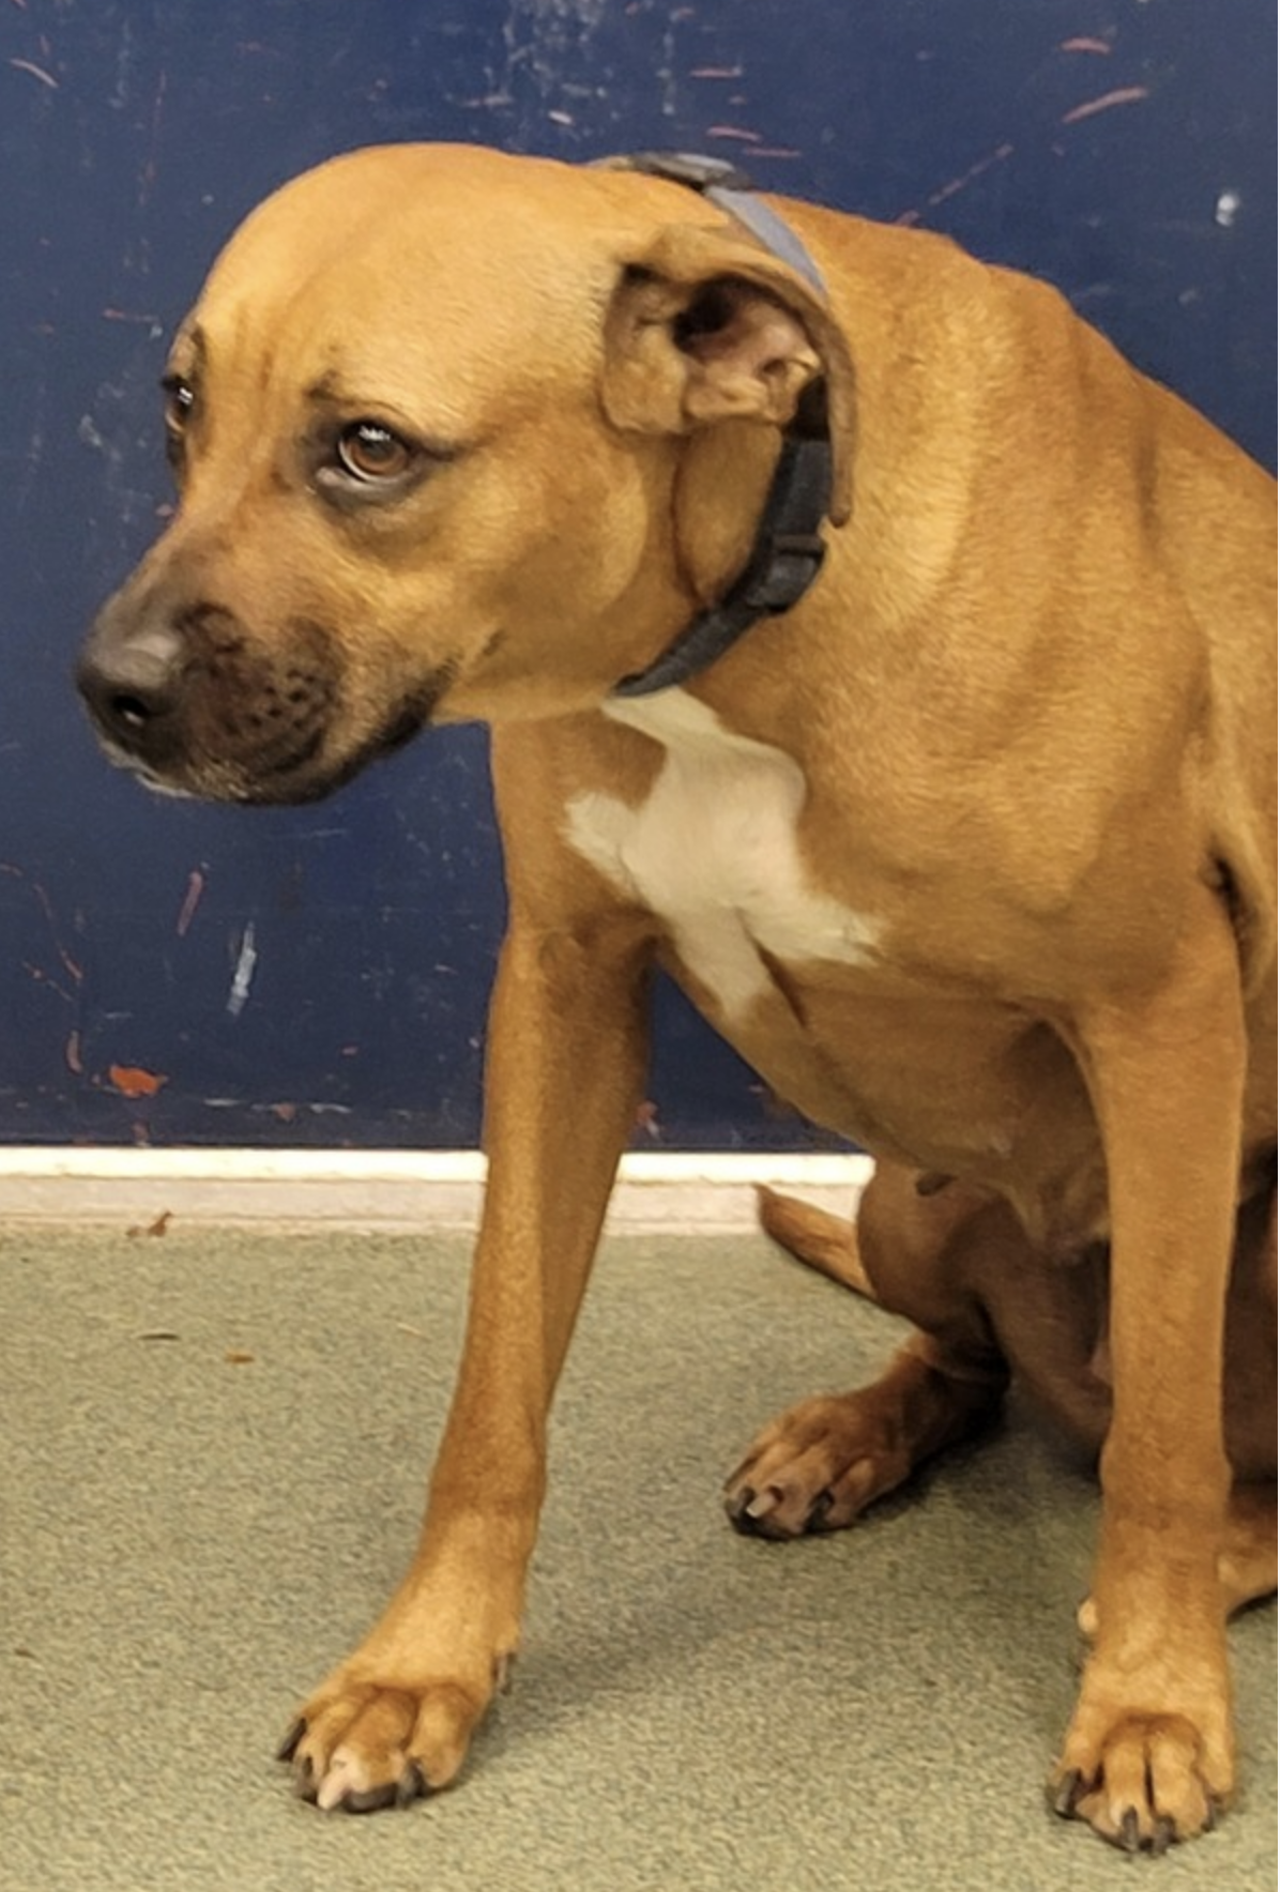 Piper
Age: 3 years old / Breed: 	Boxer Cross / Sex: Female 
Piper is an adorable boxer mix who is healthy, up-to-date on her vaccines and spayed.